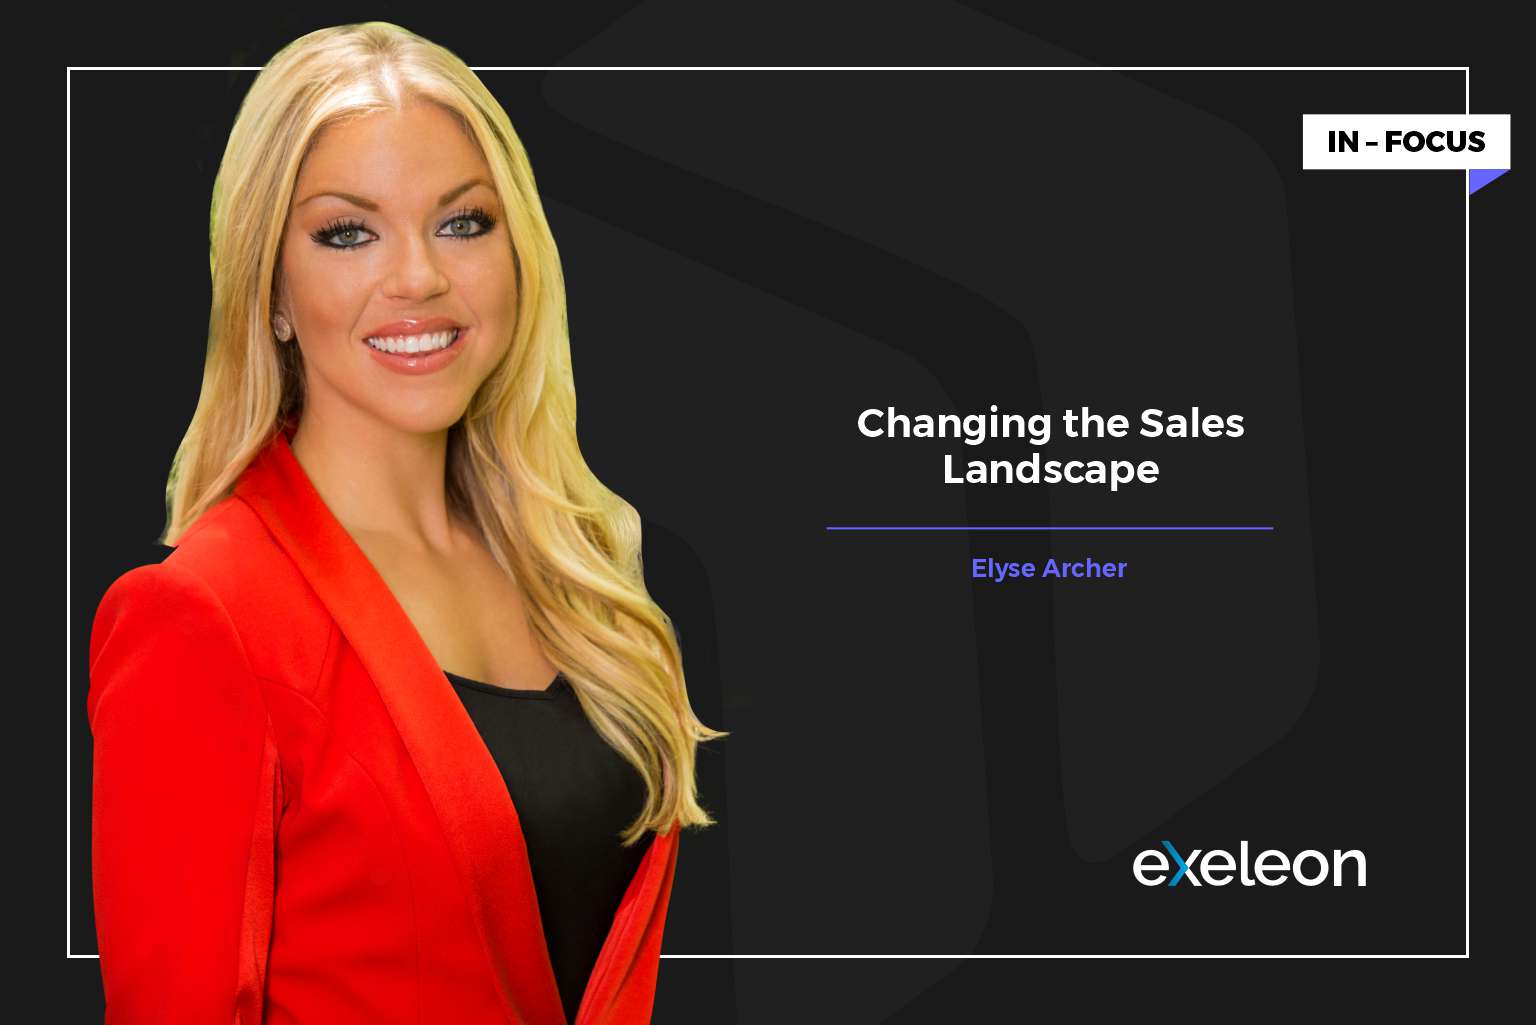 Elyse Archer on Changing the Sales Landscape with AI